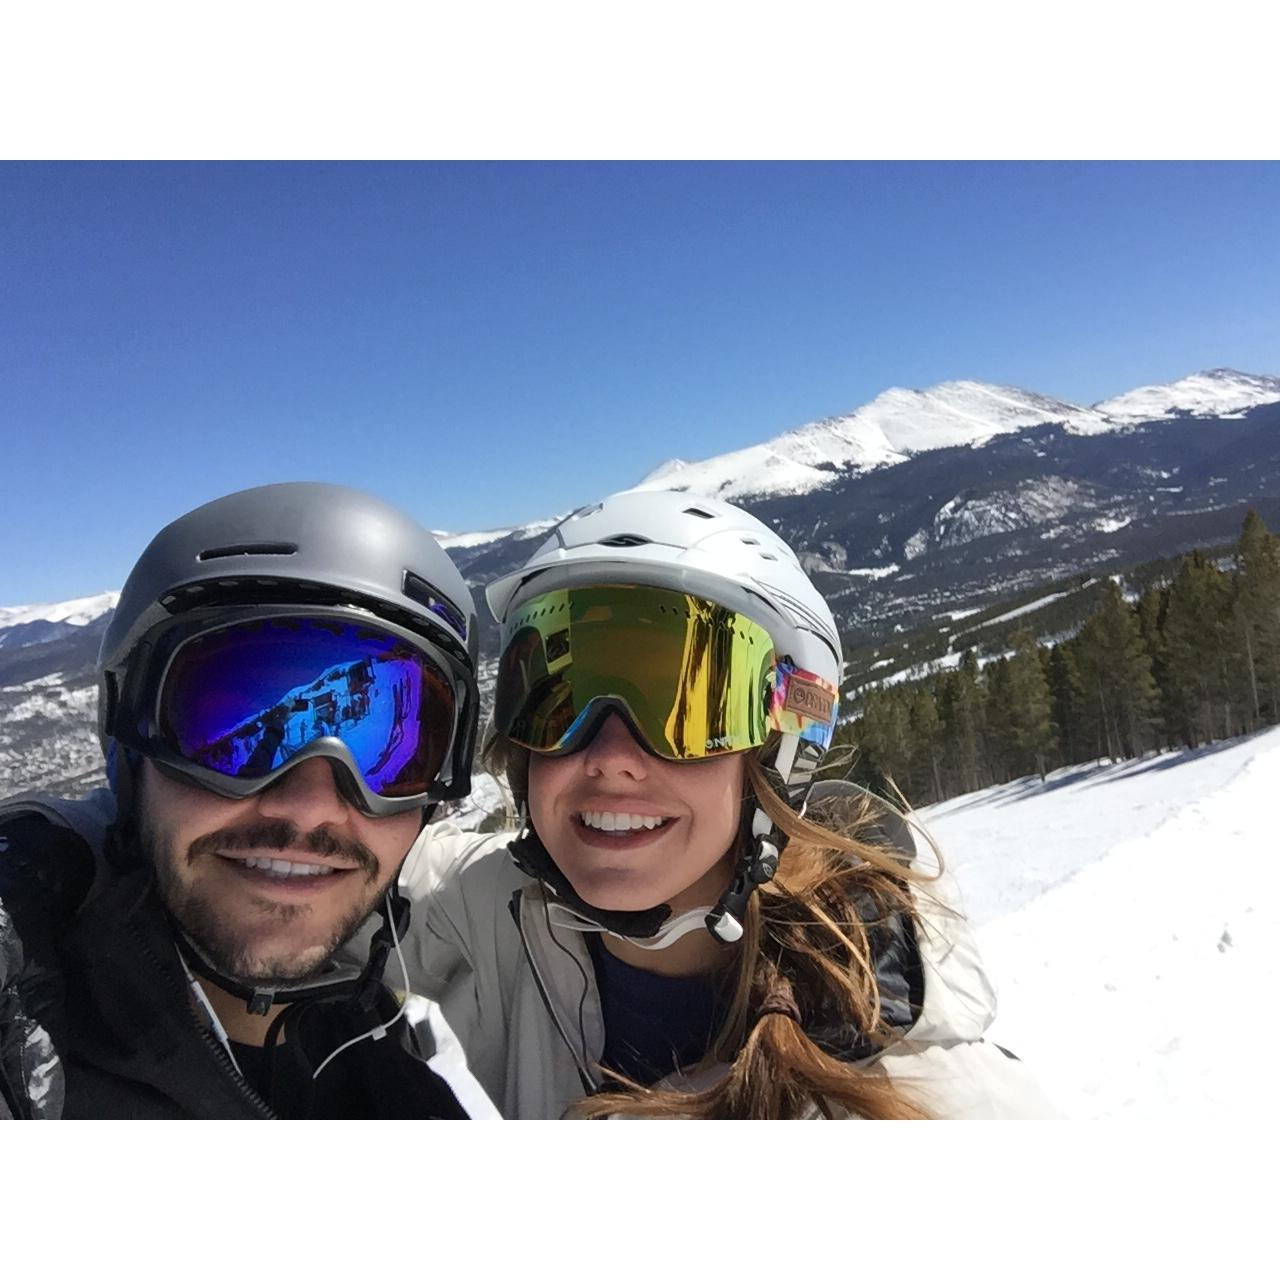 Our first trip "just friends" - to Breckenridge Colorado for spring break